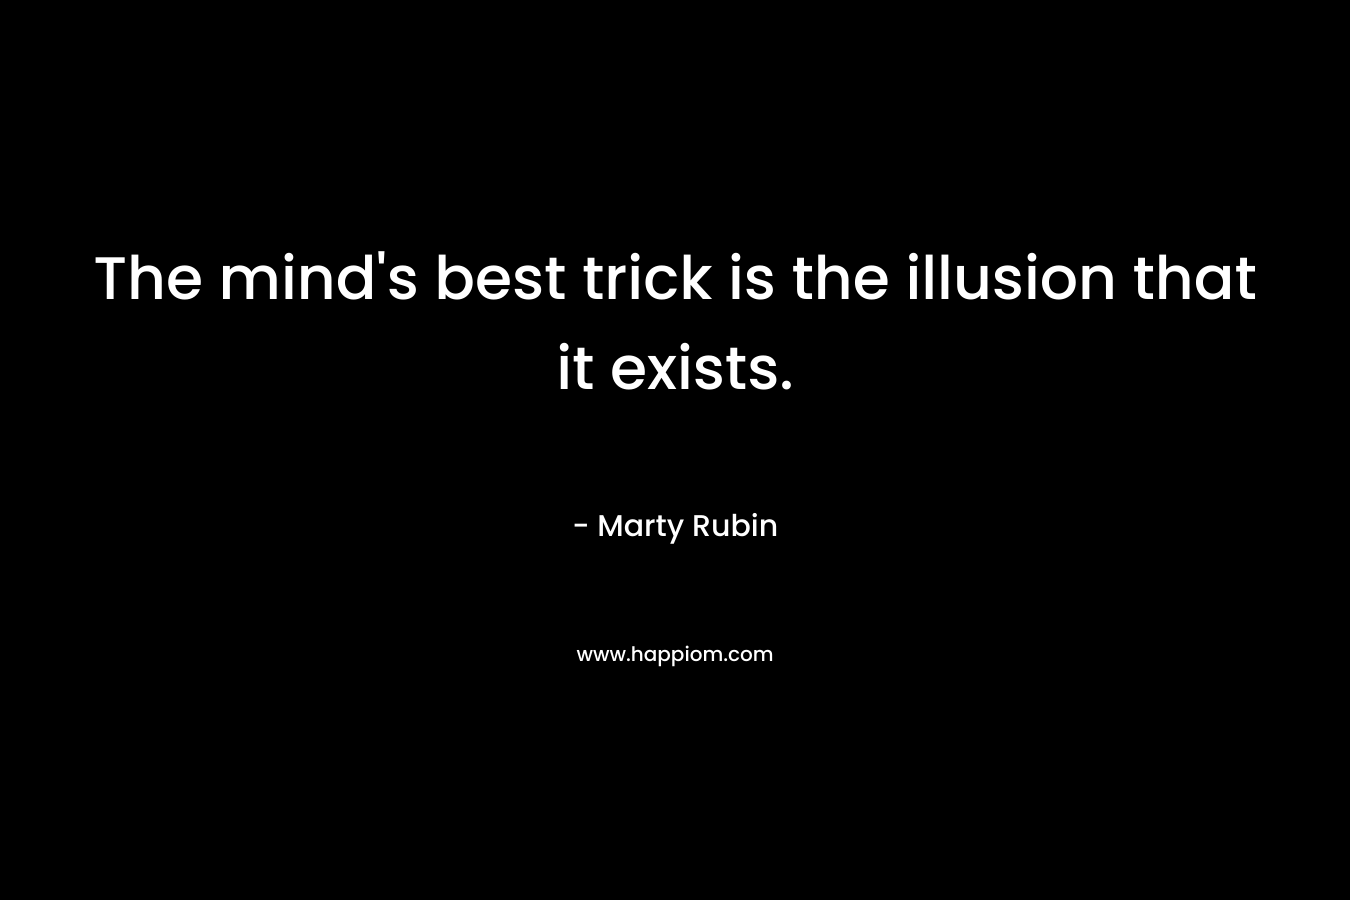 The mind’s best trick is the illusion that it exists. – Marty Rubin